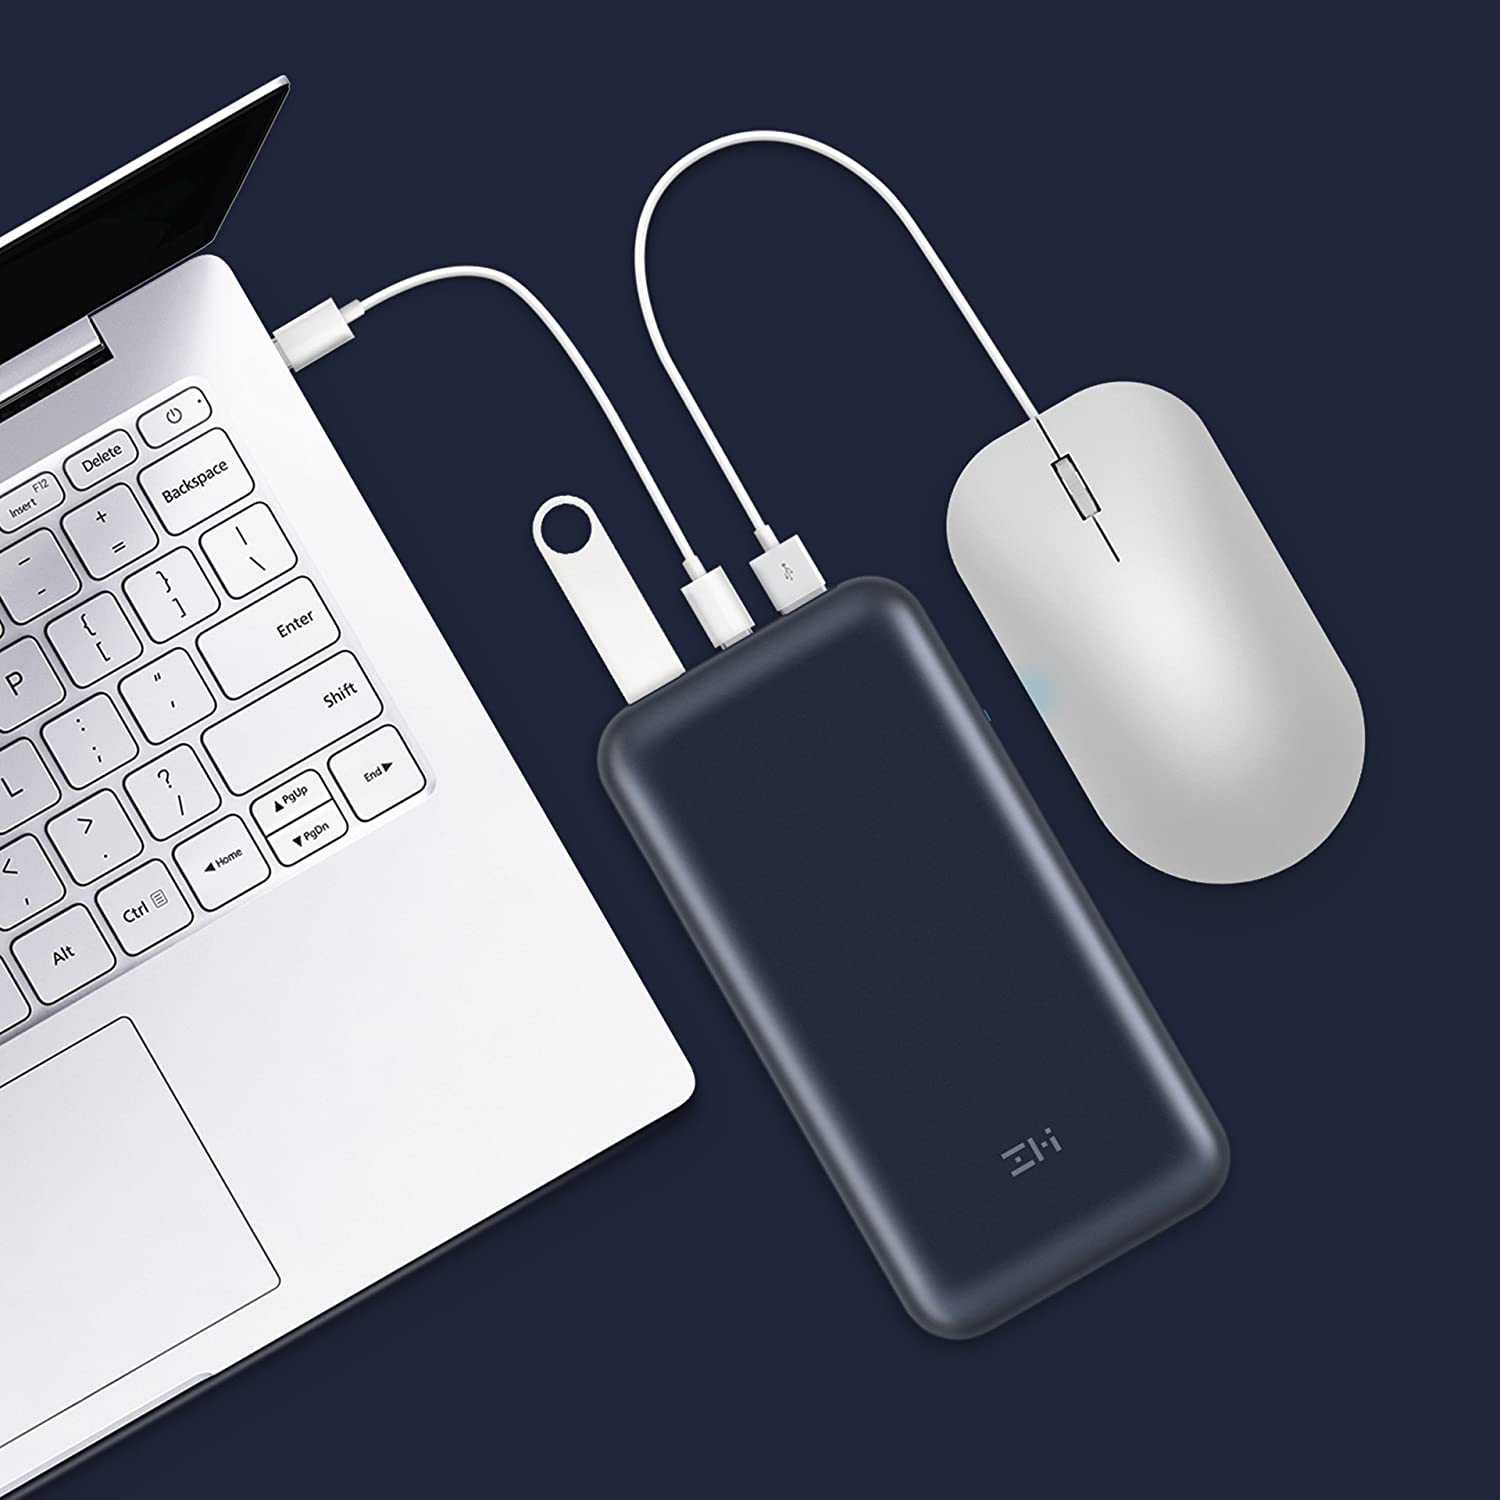 Top 10 Powerbanks You Can Use to Charge Your Laptop - Dignited